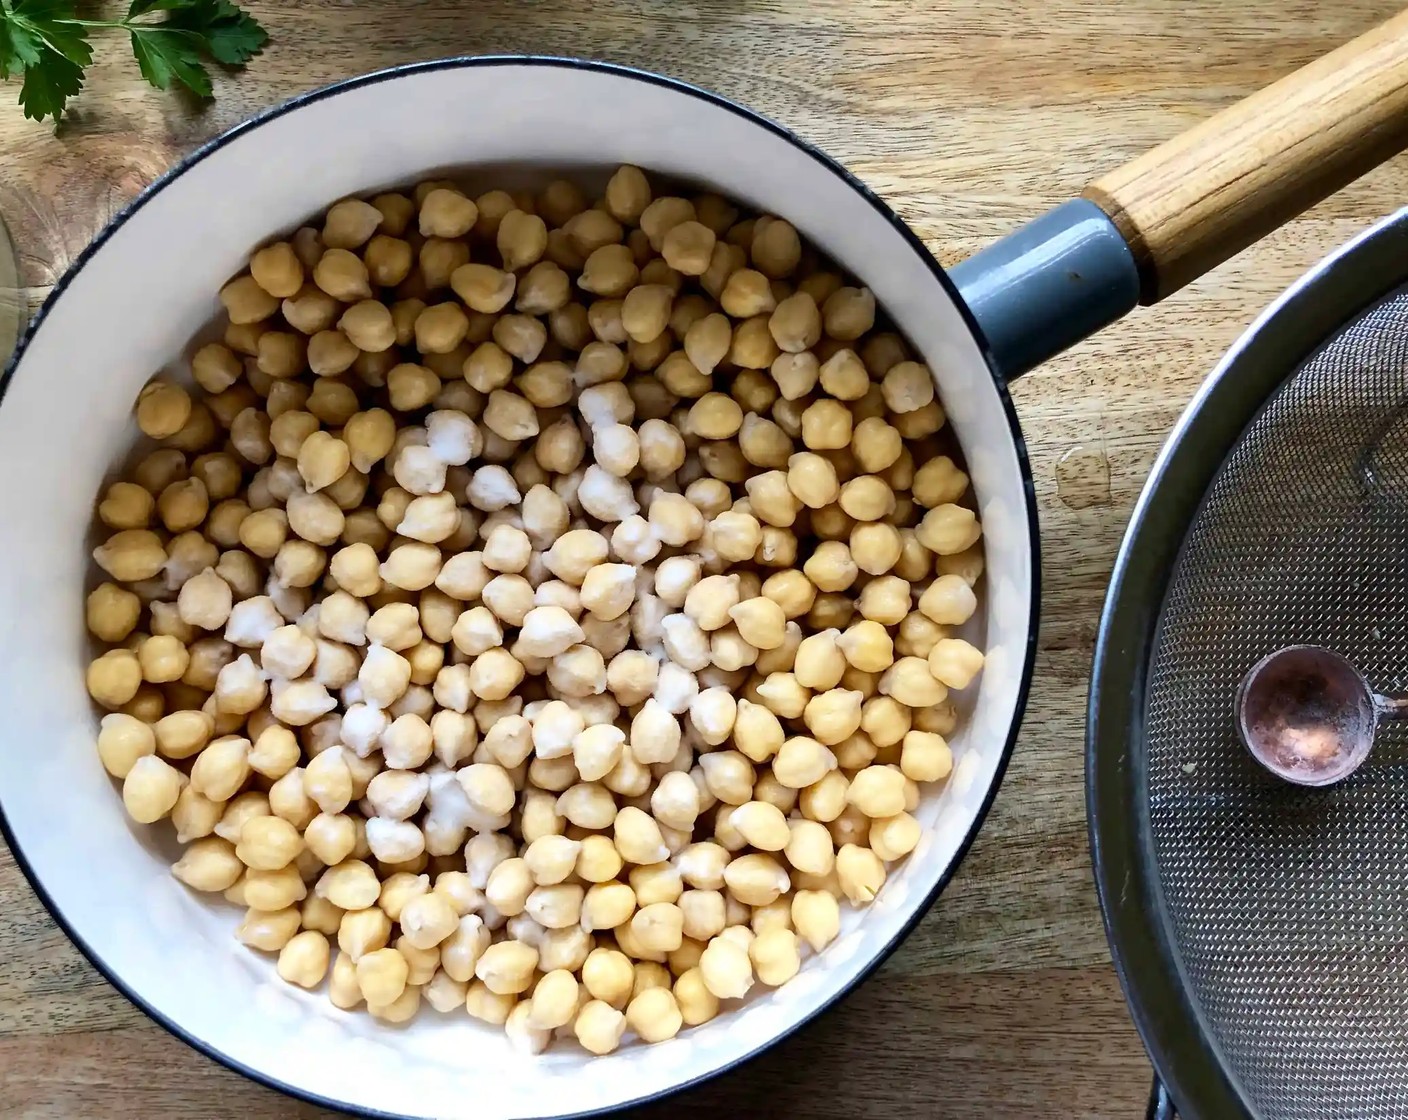 step 2 The next day, drain the chickpeas. Place a medium saucepan or pot over high heat. Add the drained chickpeas and Baking Soda (1 tsp). Cook for about three minutes, stirring constantly.